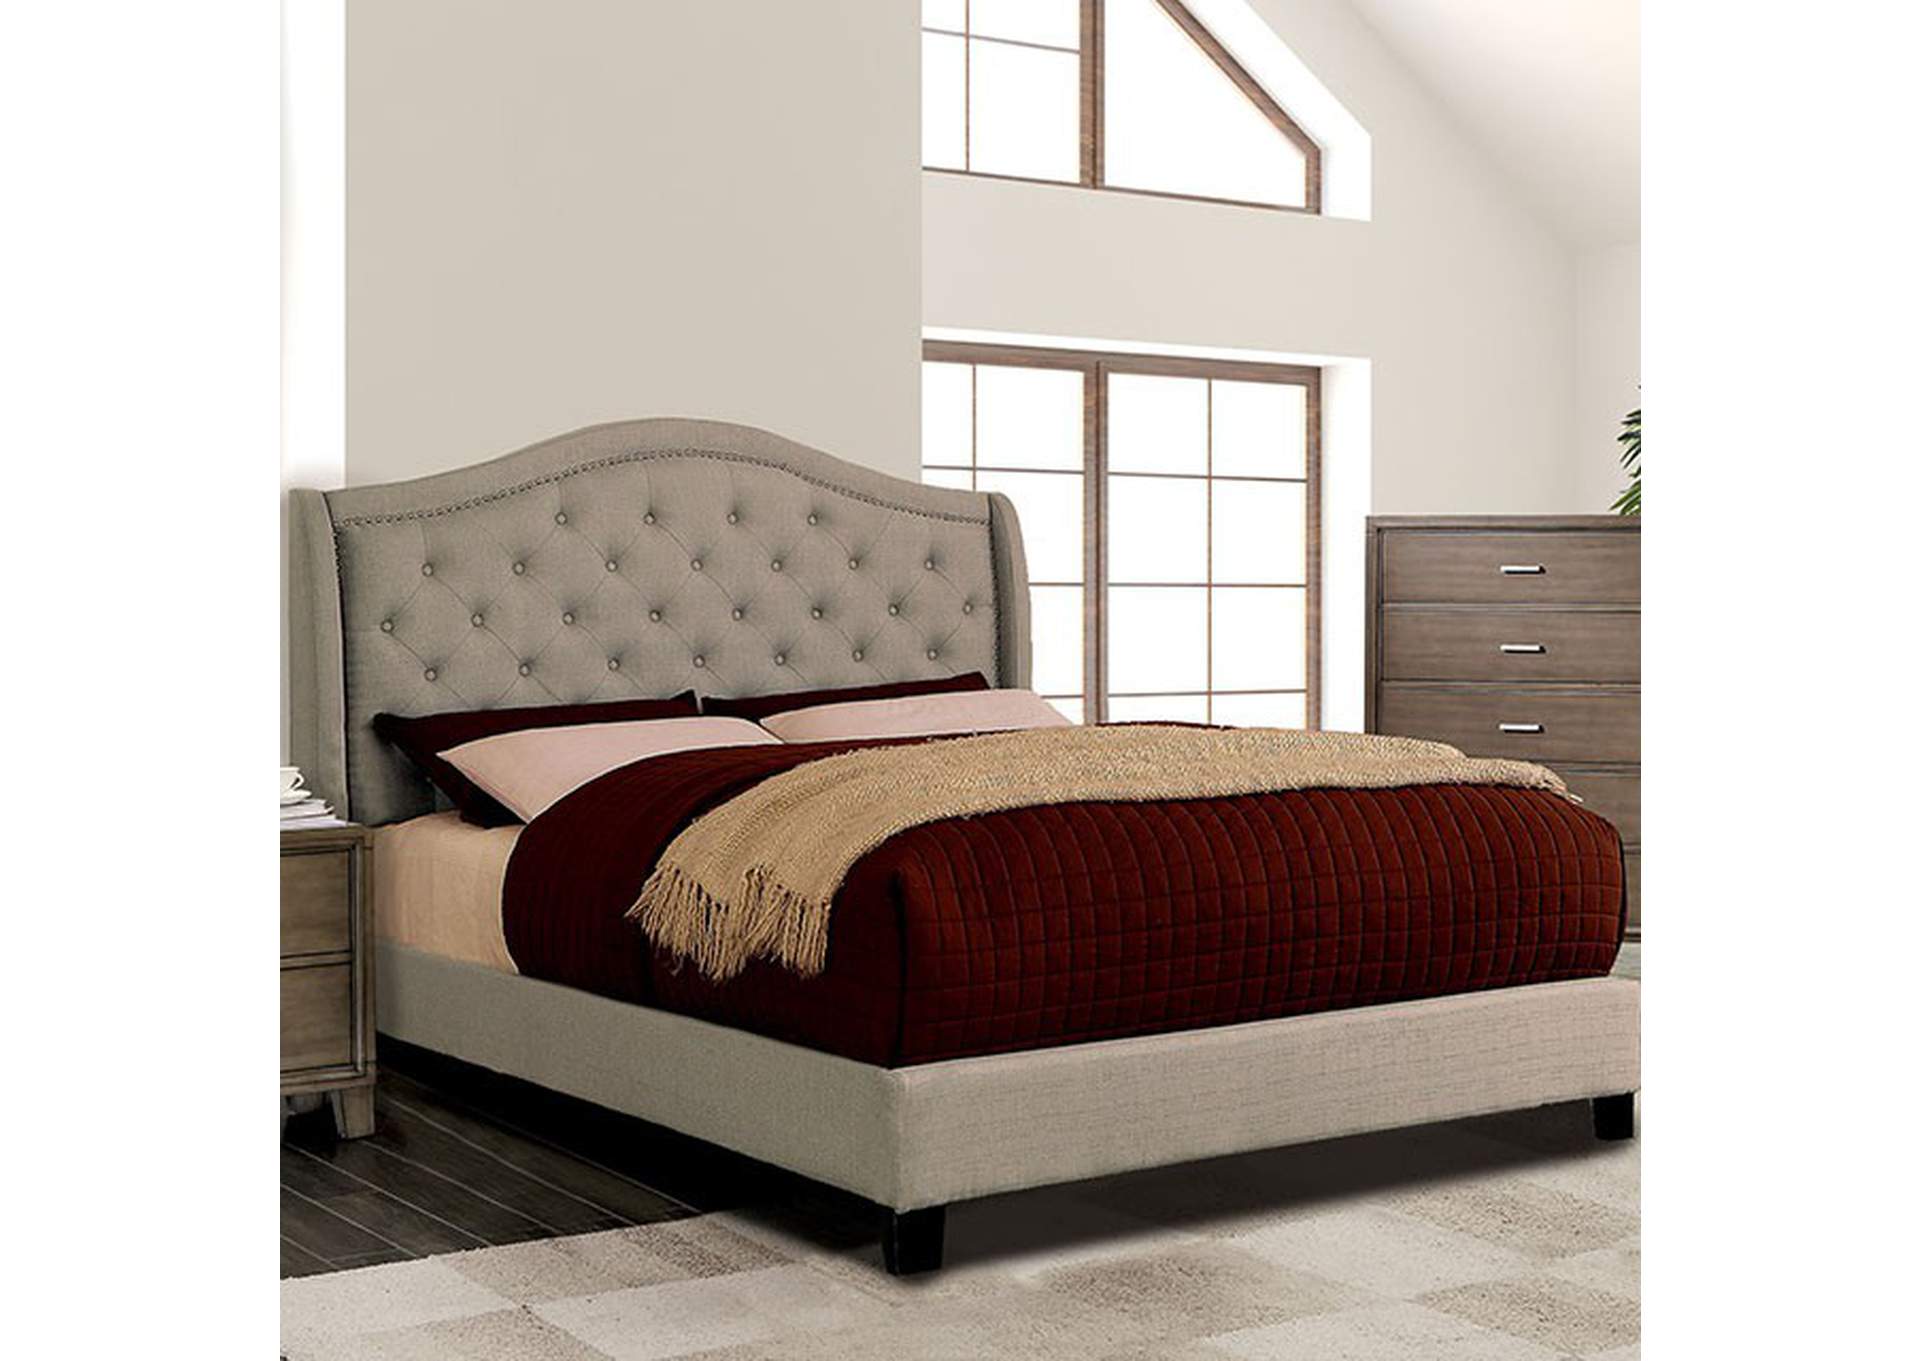 Carly Queen Bed,Furniture of America